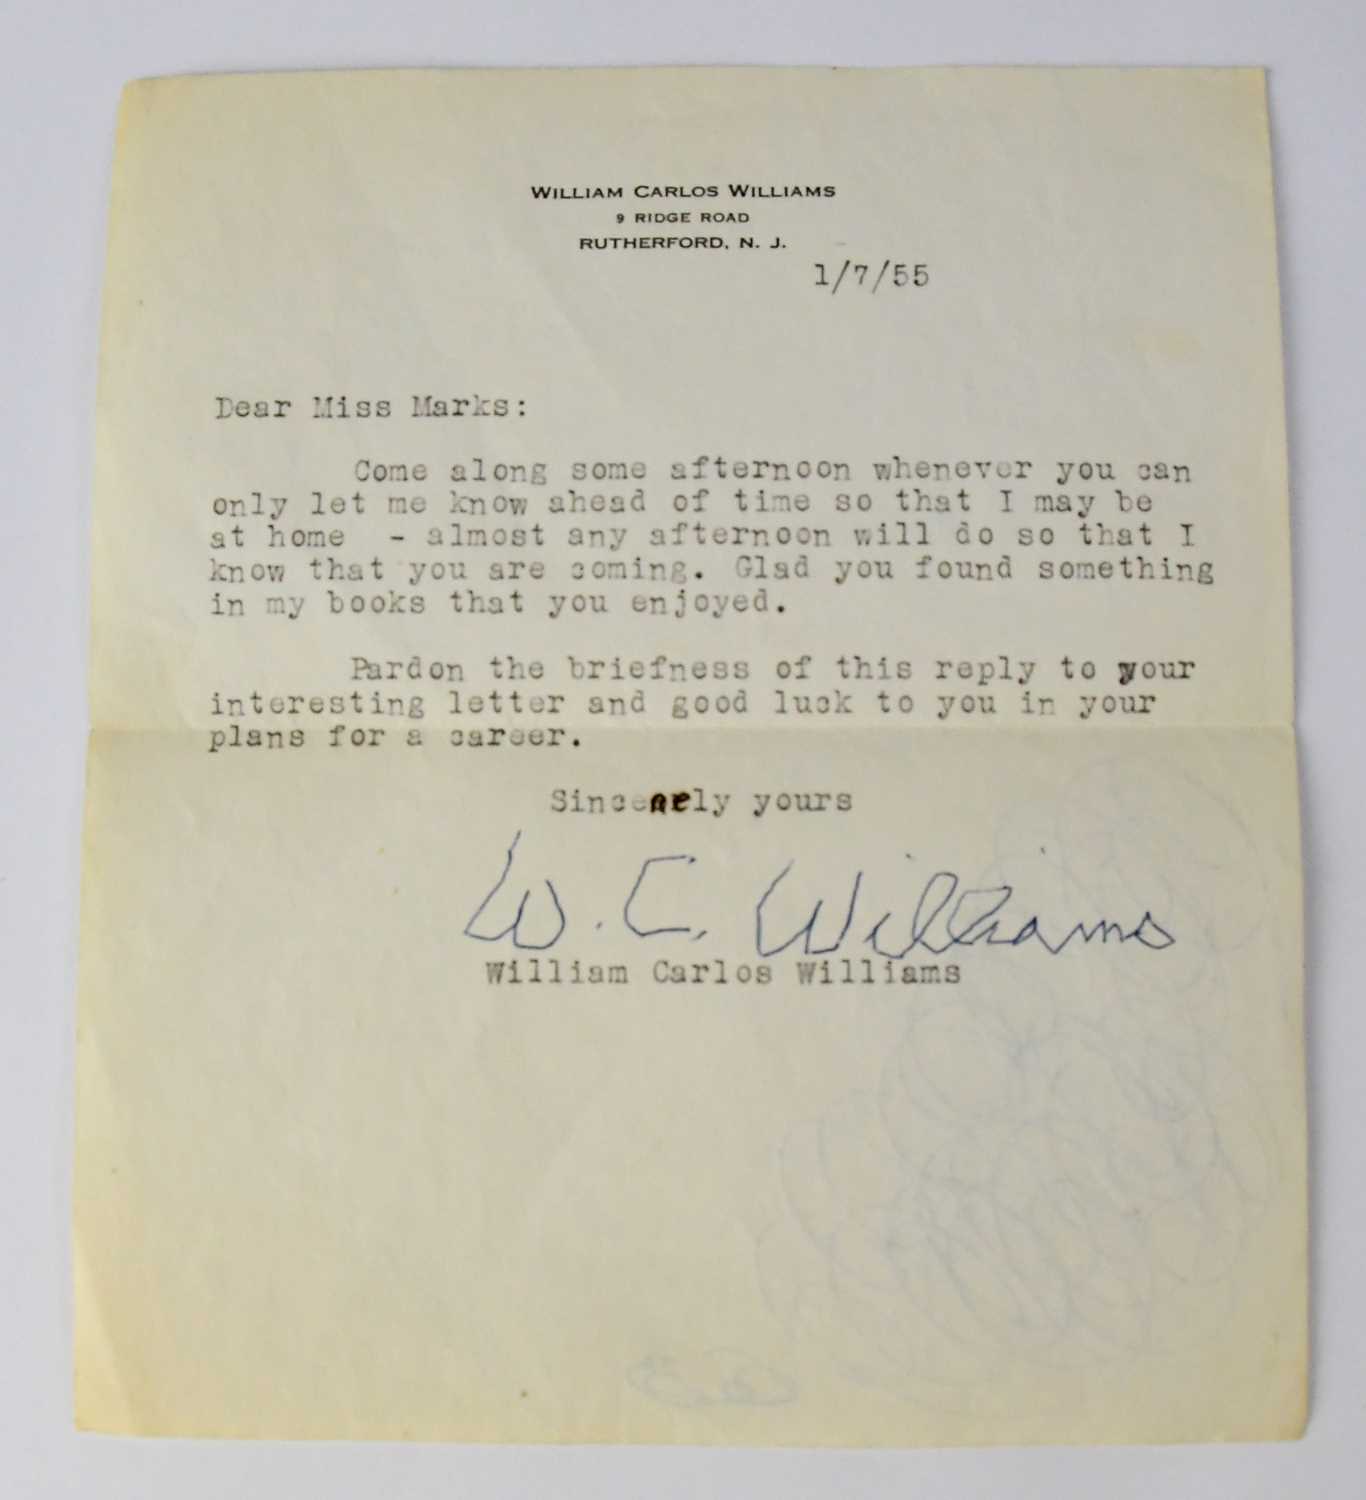 WILLIAM CARLOS WILLIAMS; a typed note dated 1st July '55 to Miss Marks, and signed 'Sincerely